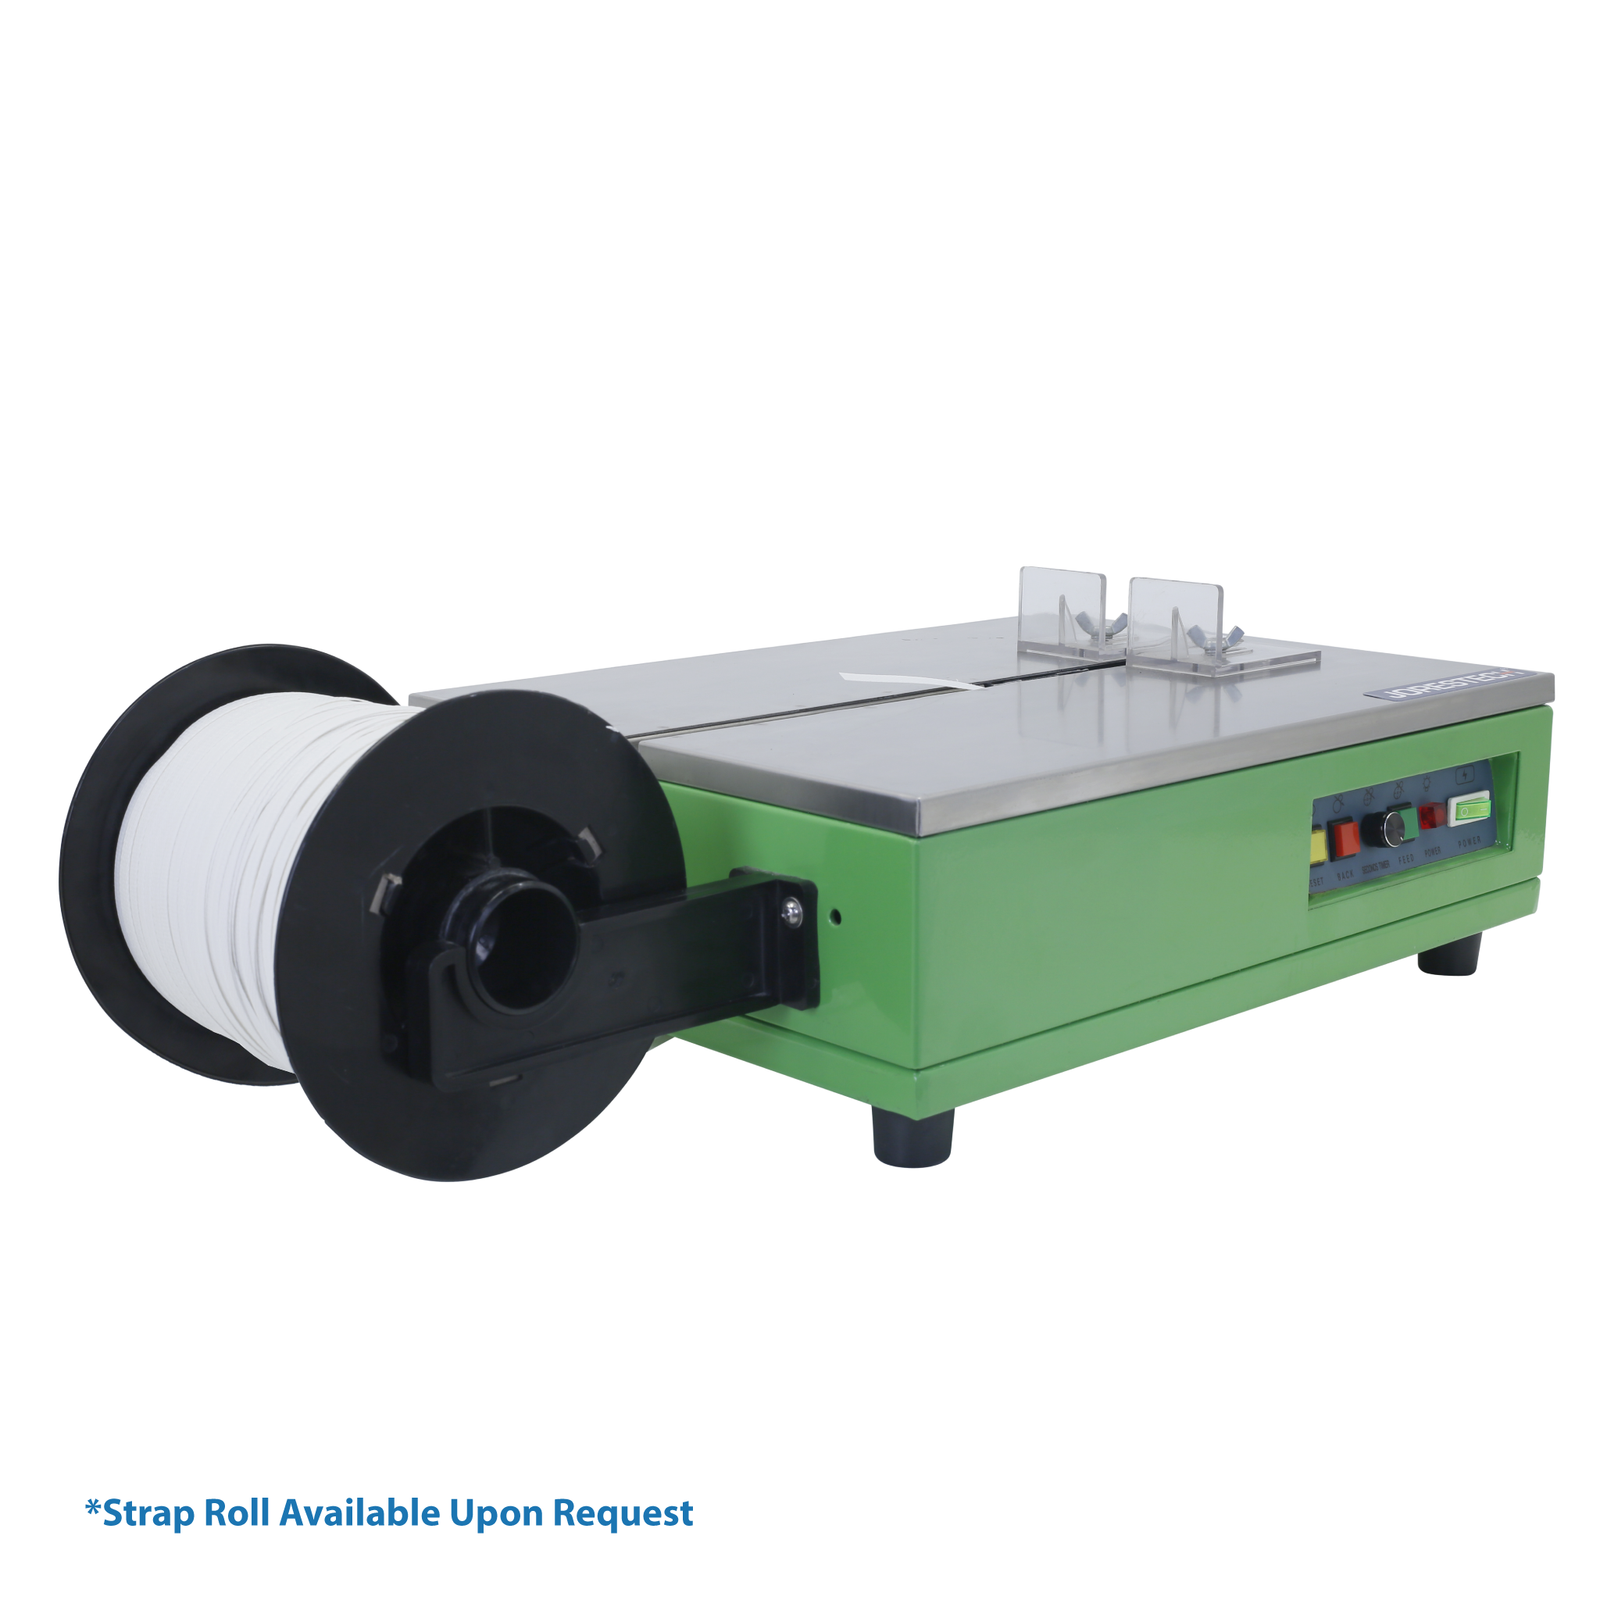 Diagonal view of a green JORESTECH® tabletop strapping machine over a white background. A strapping roll has been mounted on the machine and a small text in blue letters on the lower left corner says strap roll available upon request